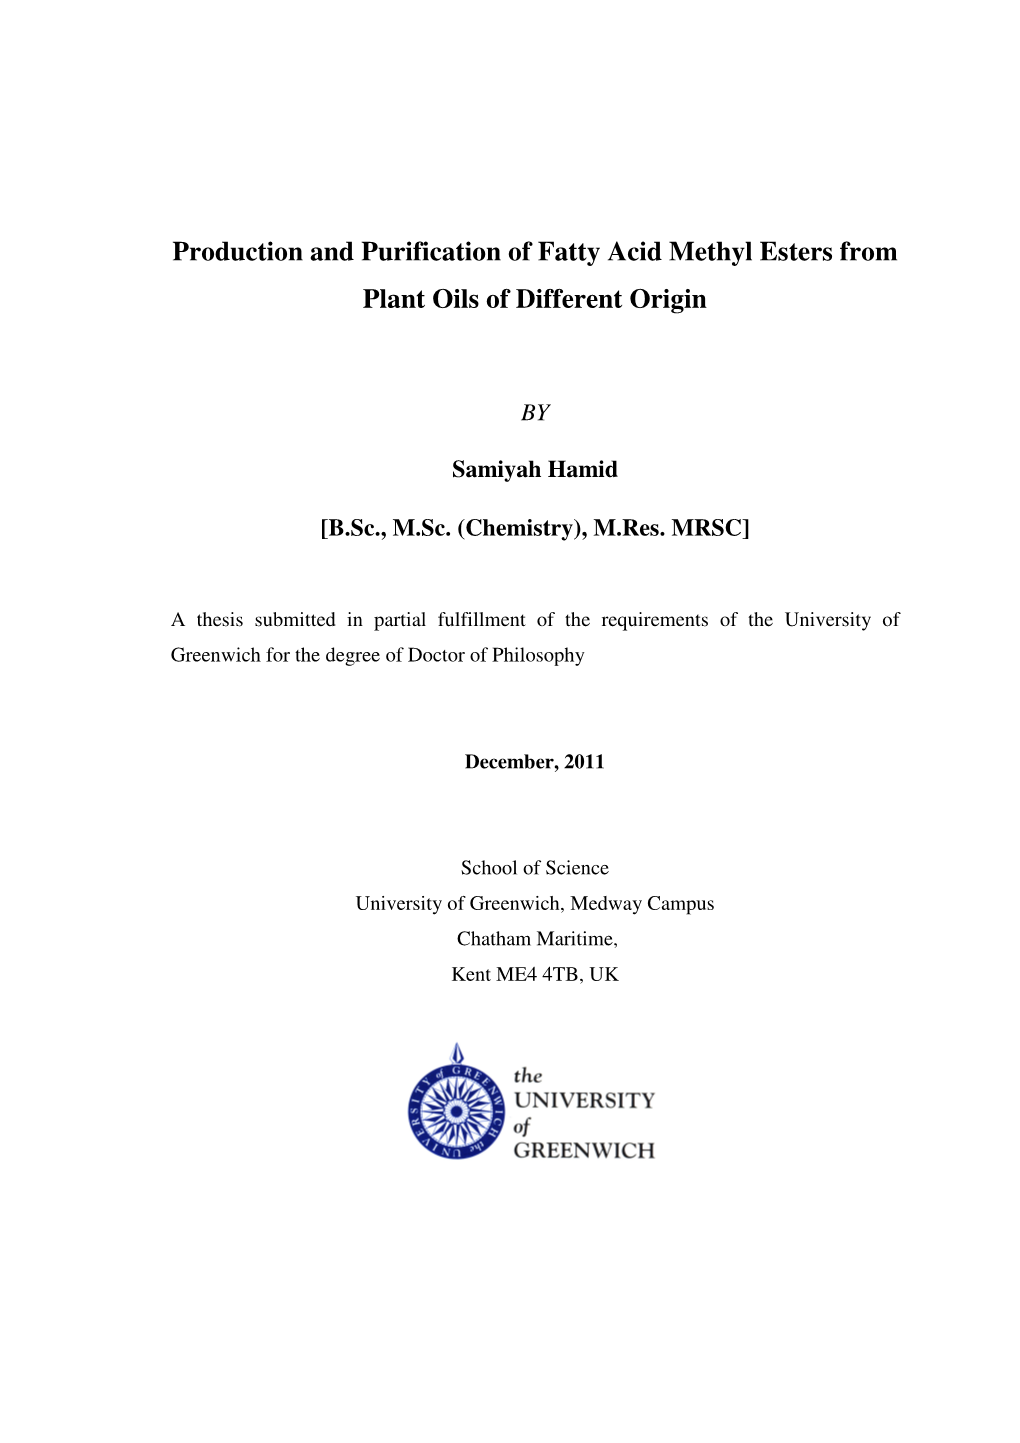 Production and Purification of Fatty Acid Methyl Esters from Plant Oils of Different Origin